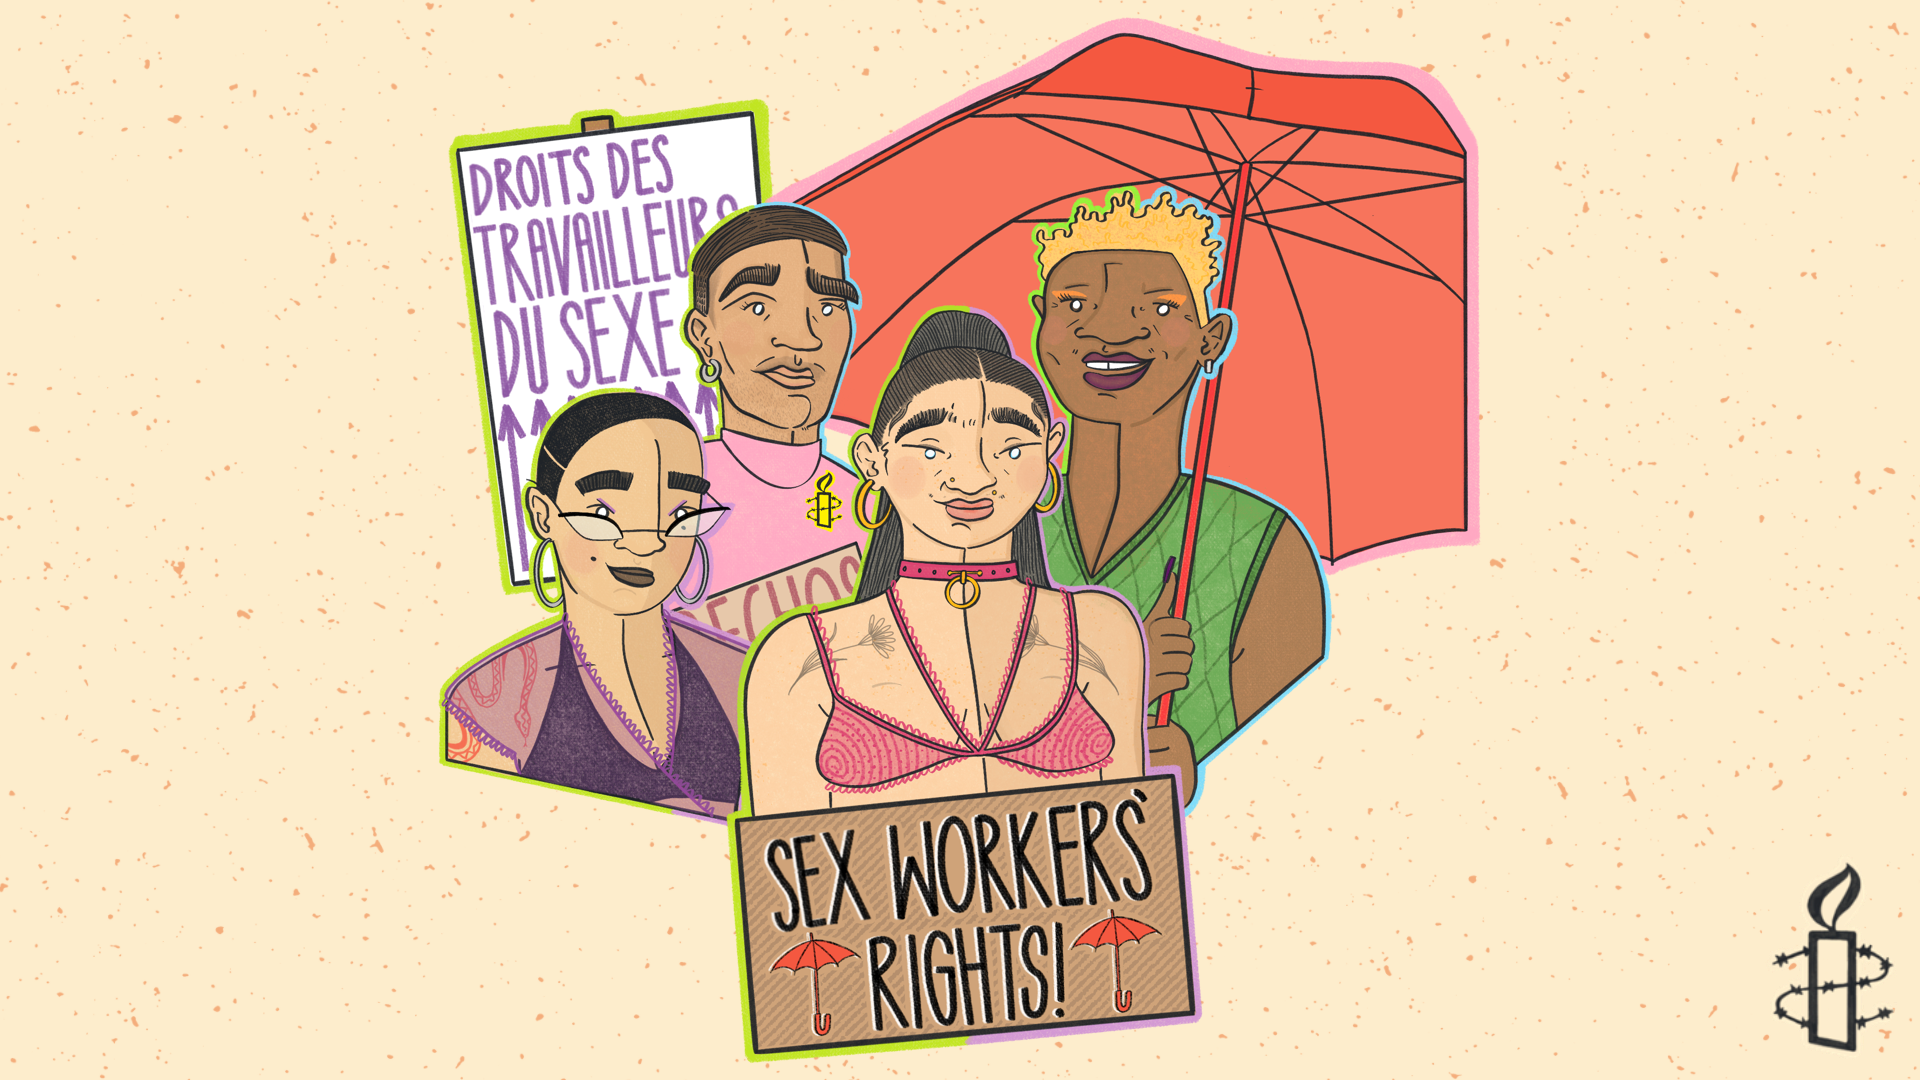 STAND UP FOR SEX WORKERS RIGHTS